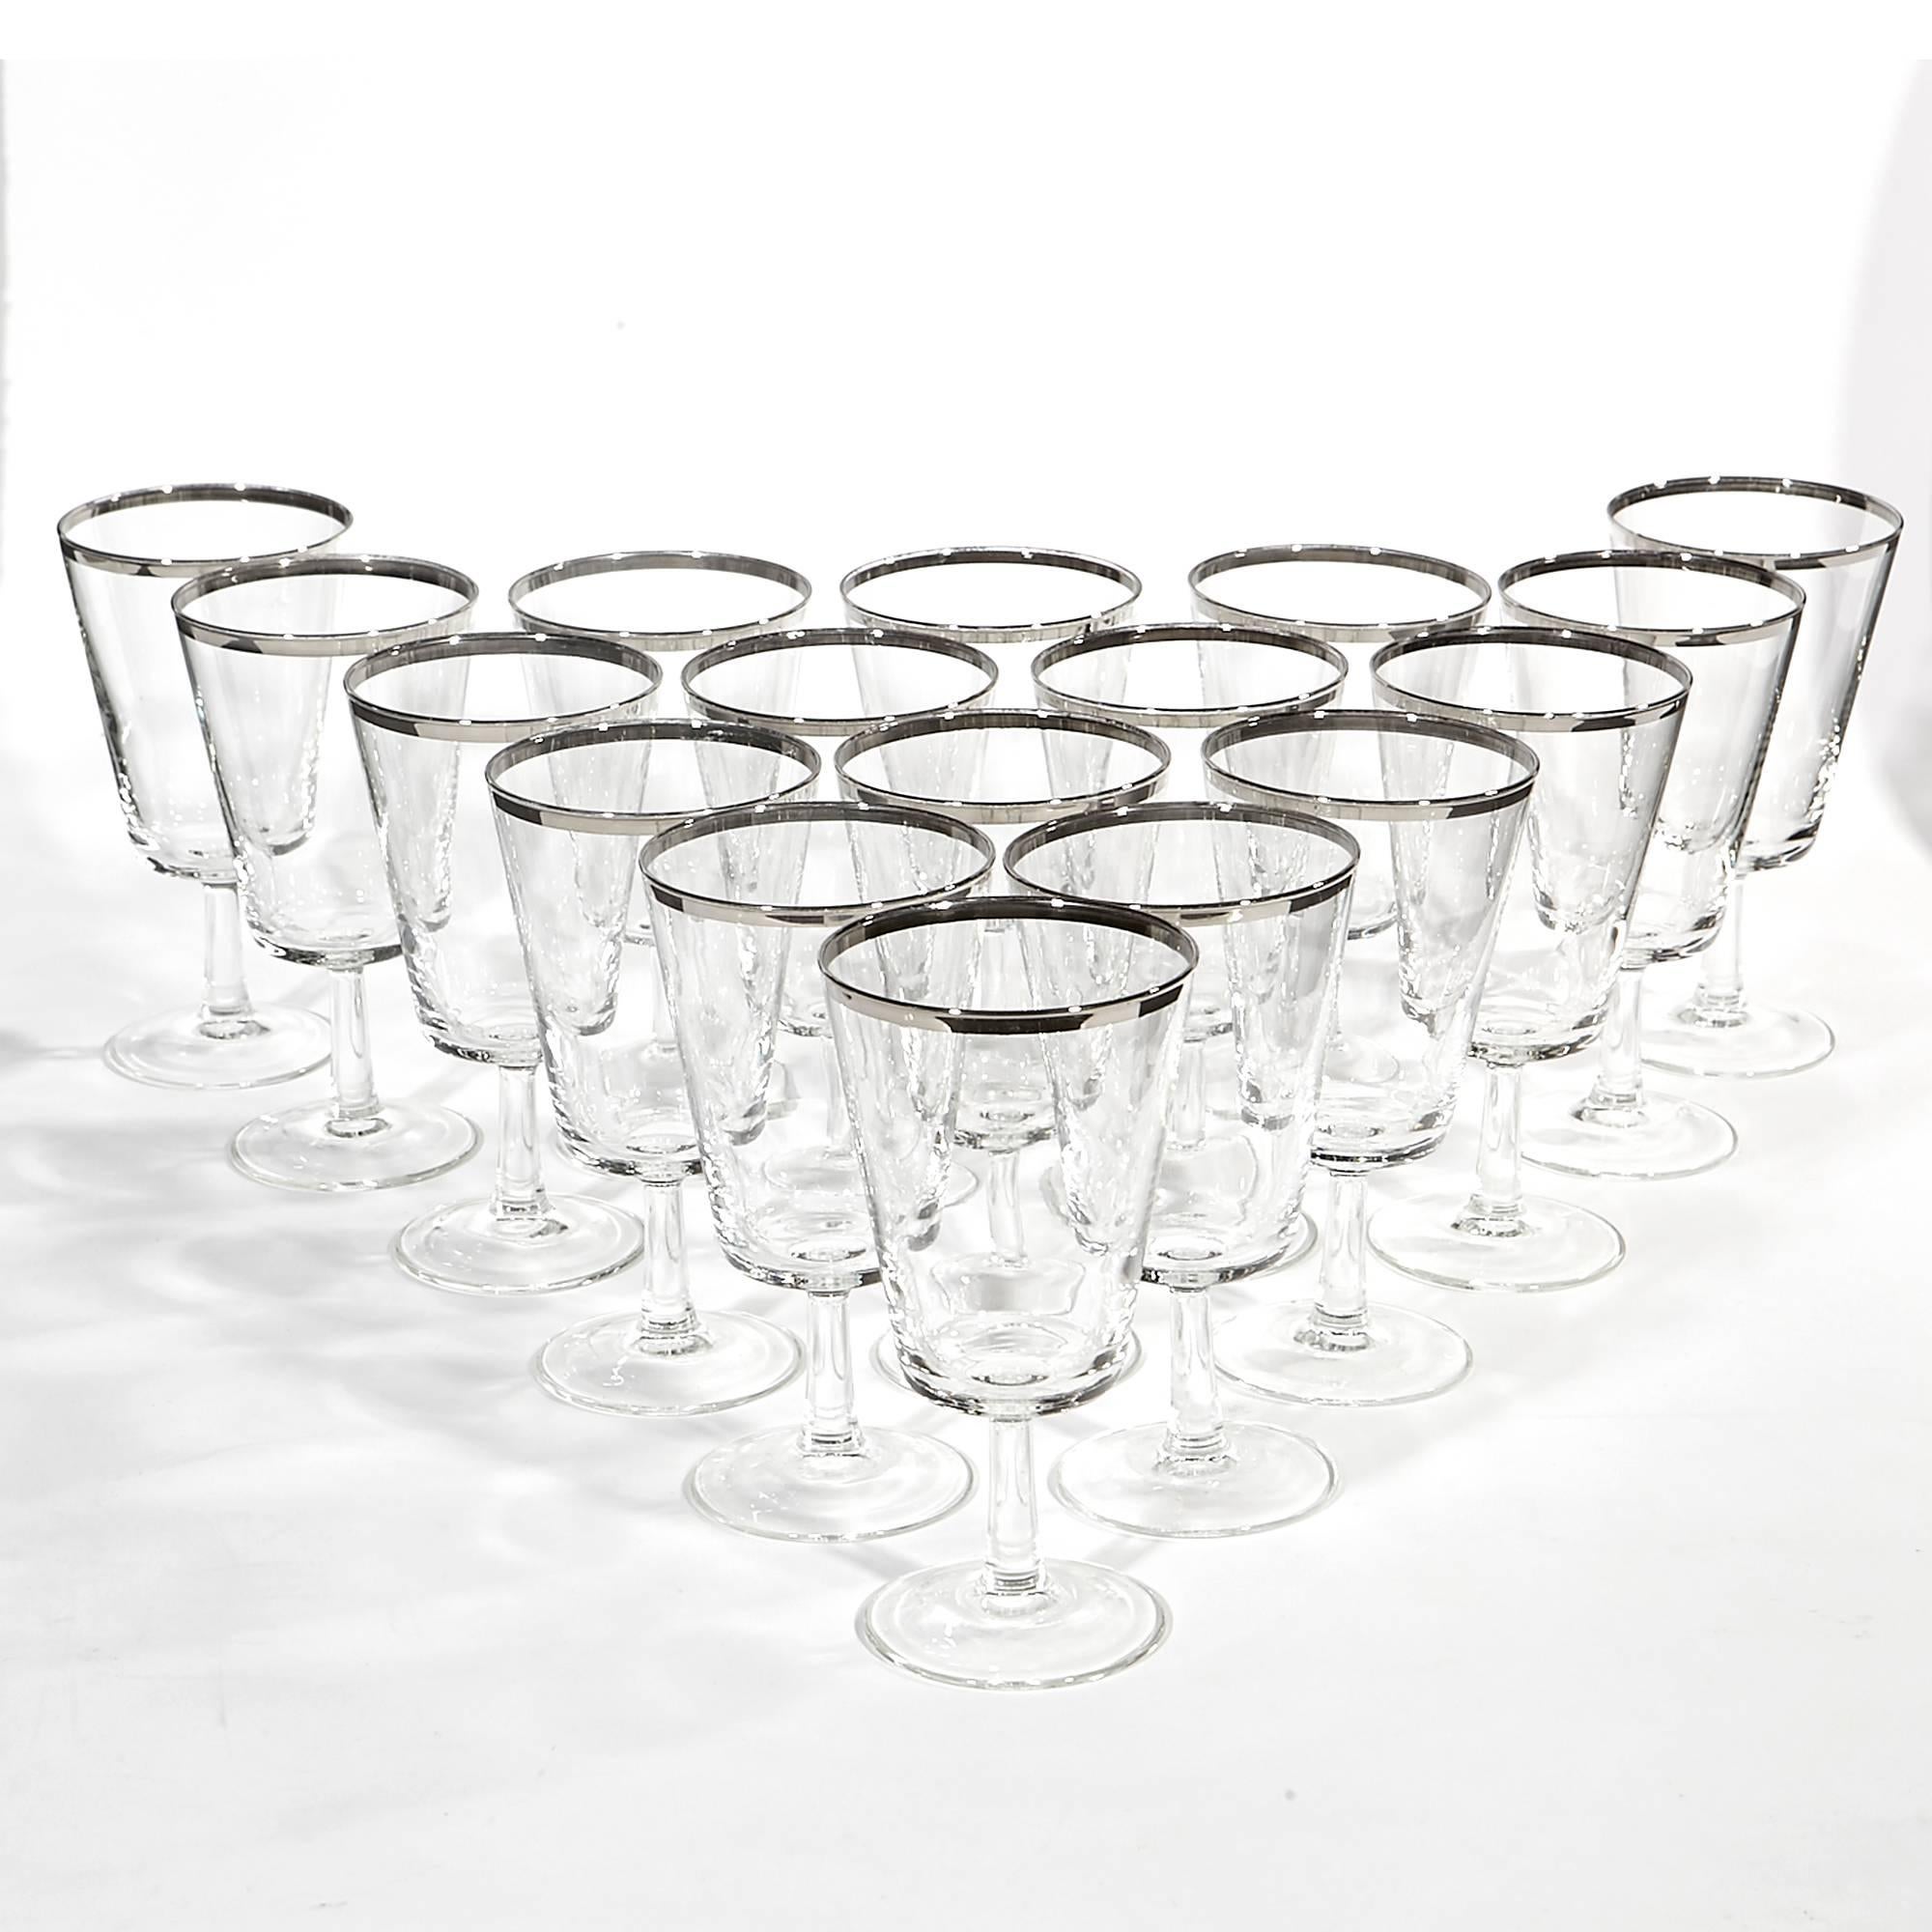 Vintage mid-20th century modern set of 17 silver rimmed tall wine glass stems, circa 1960s. Marked France.